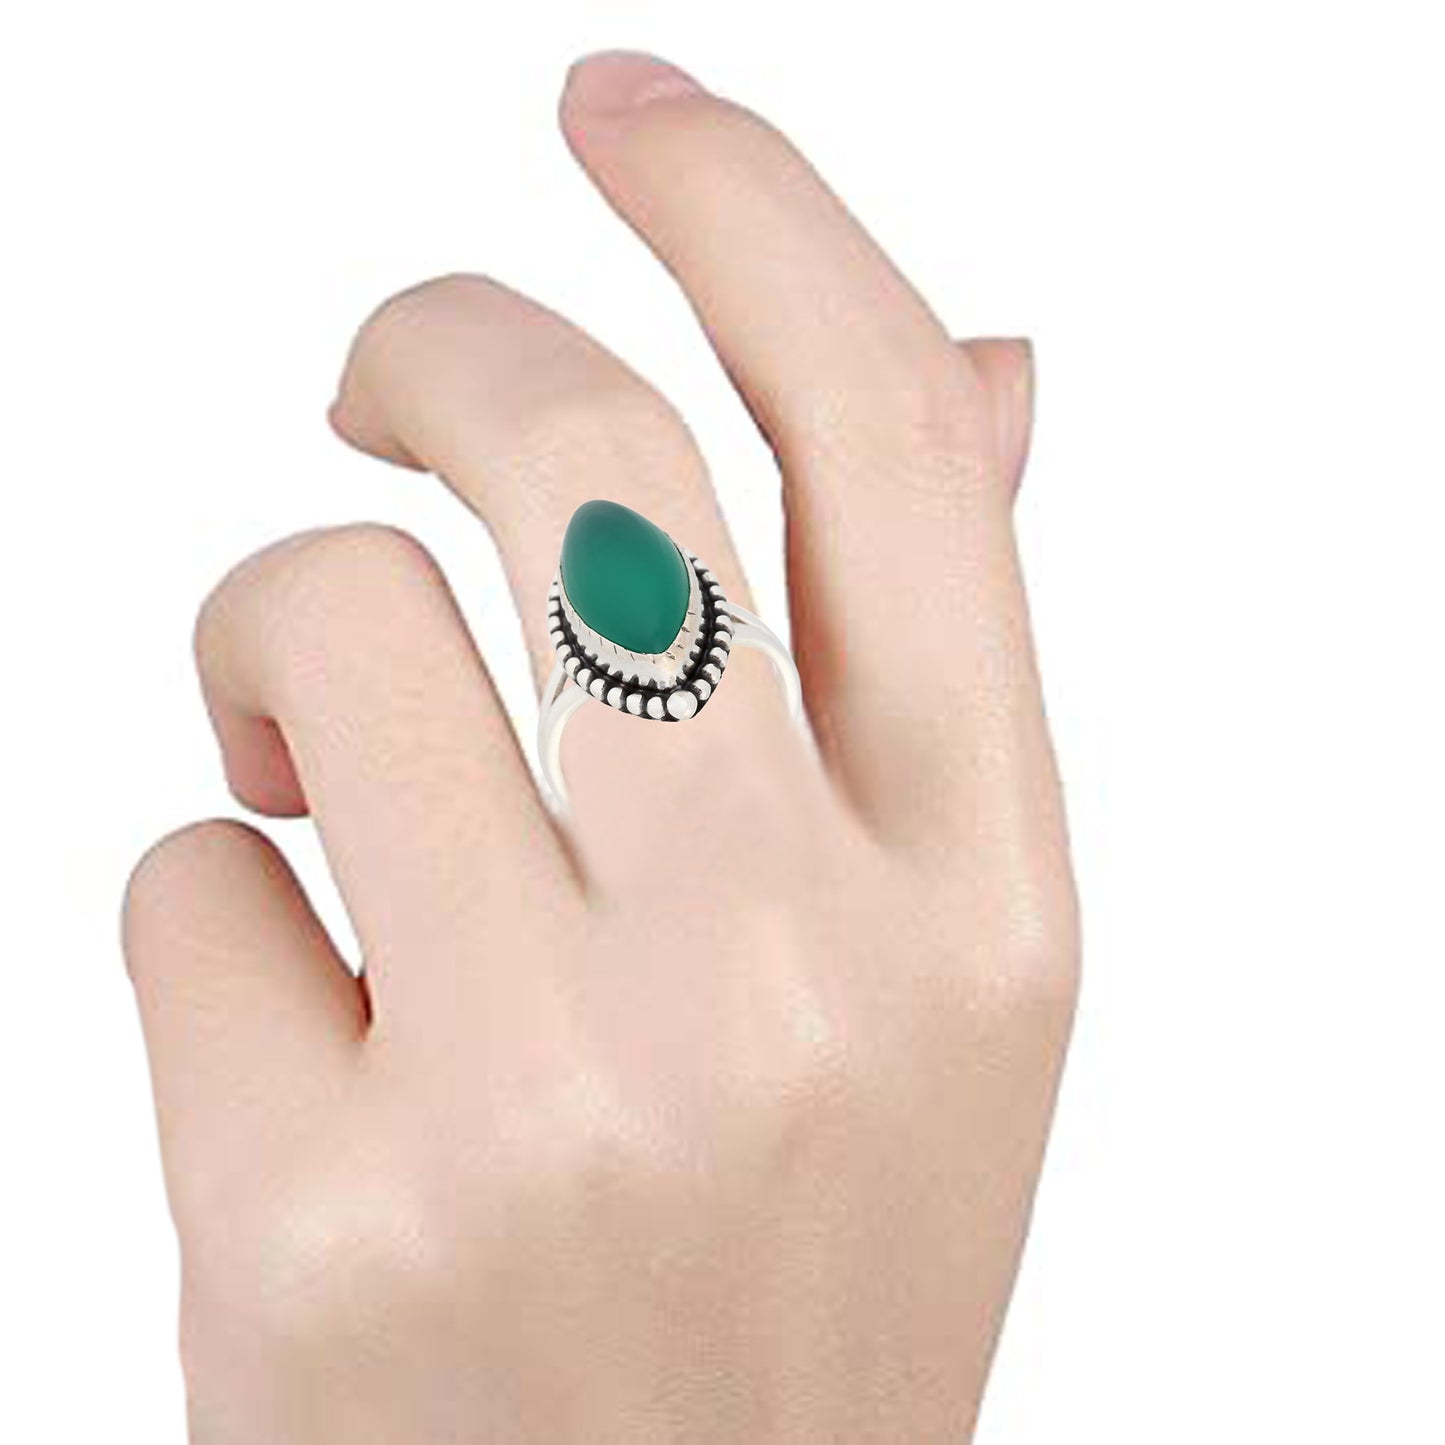 Sterling Silver 925 Green Onyx Ring - Pinctore